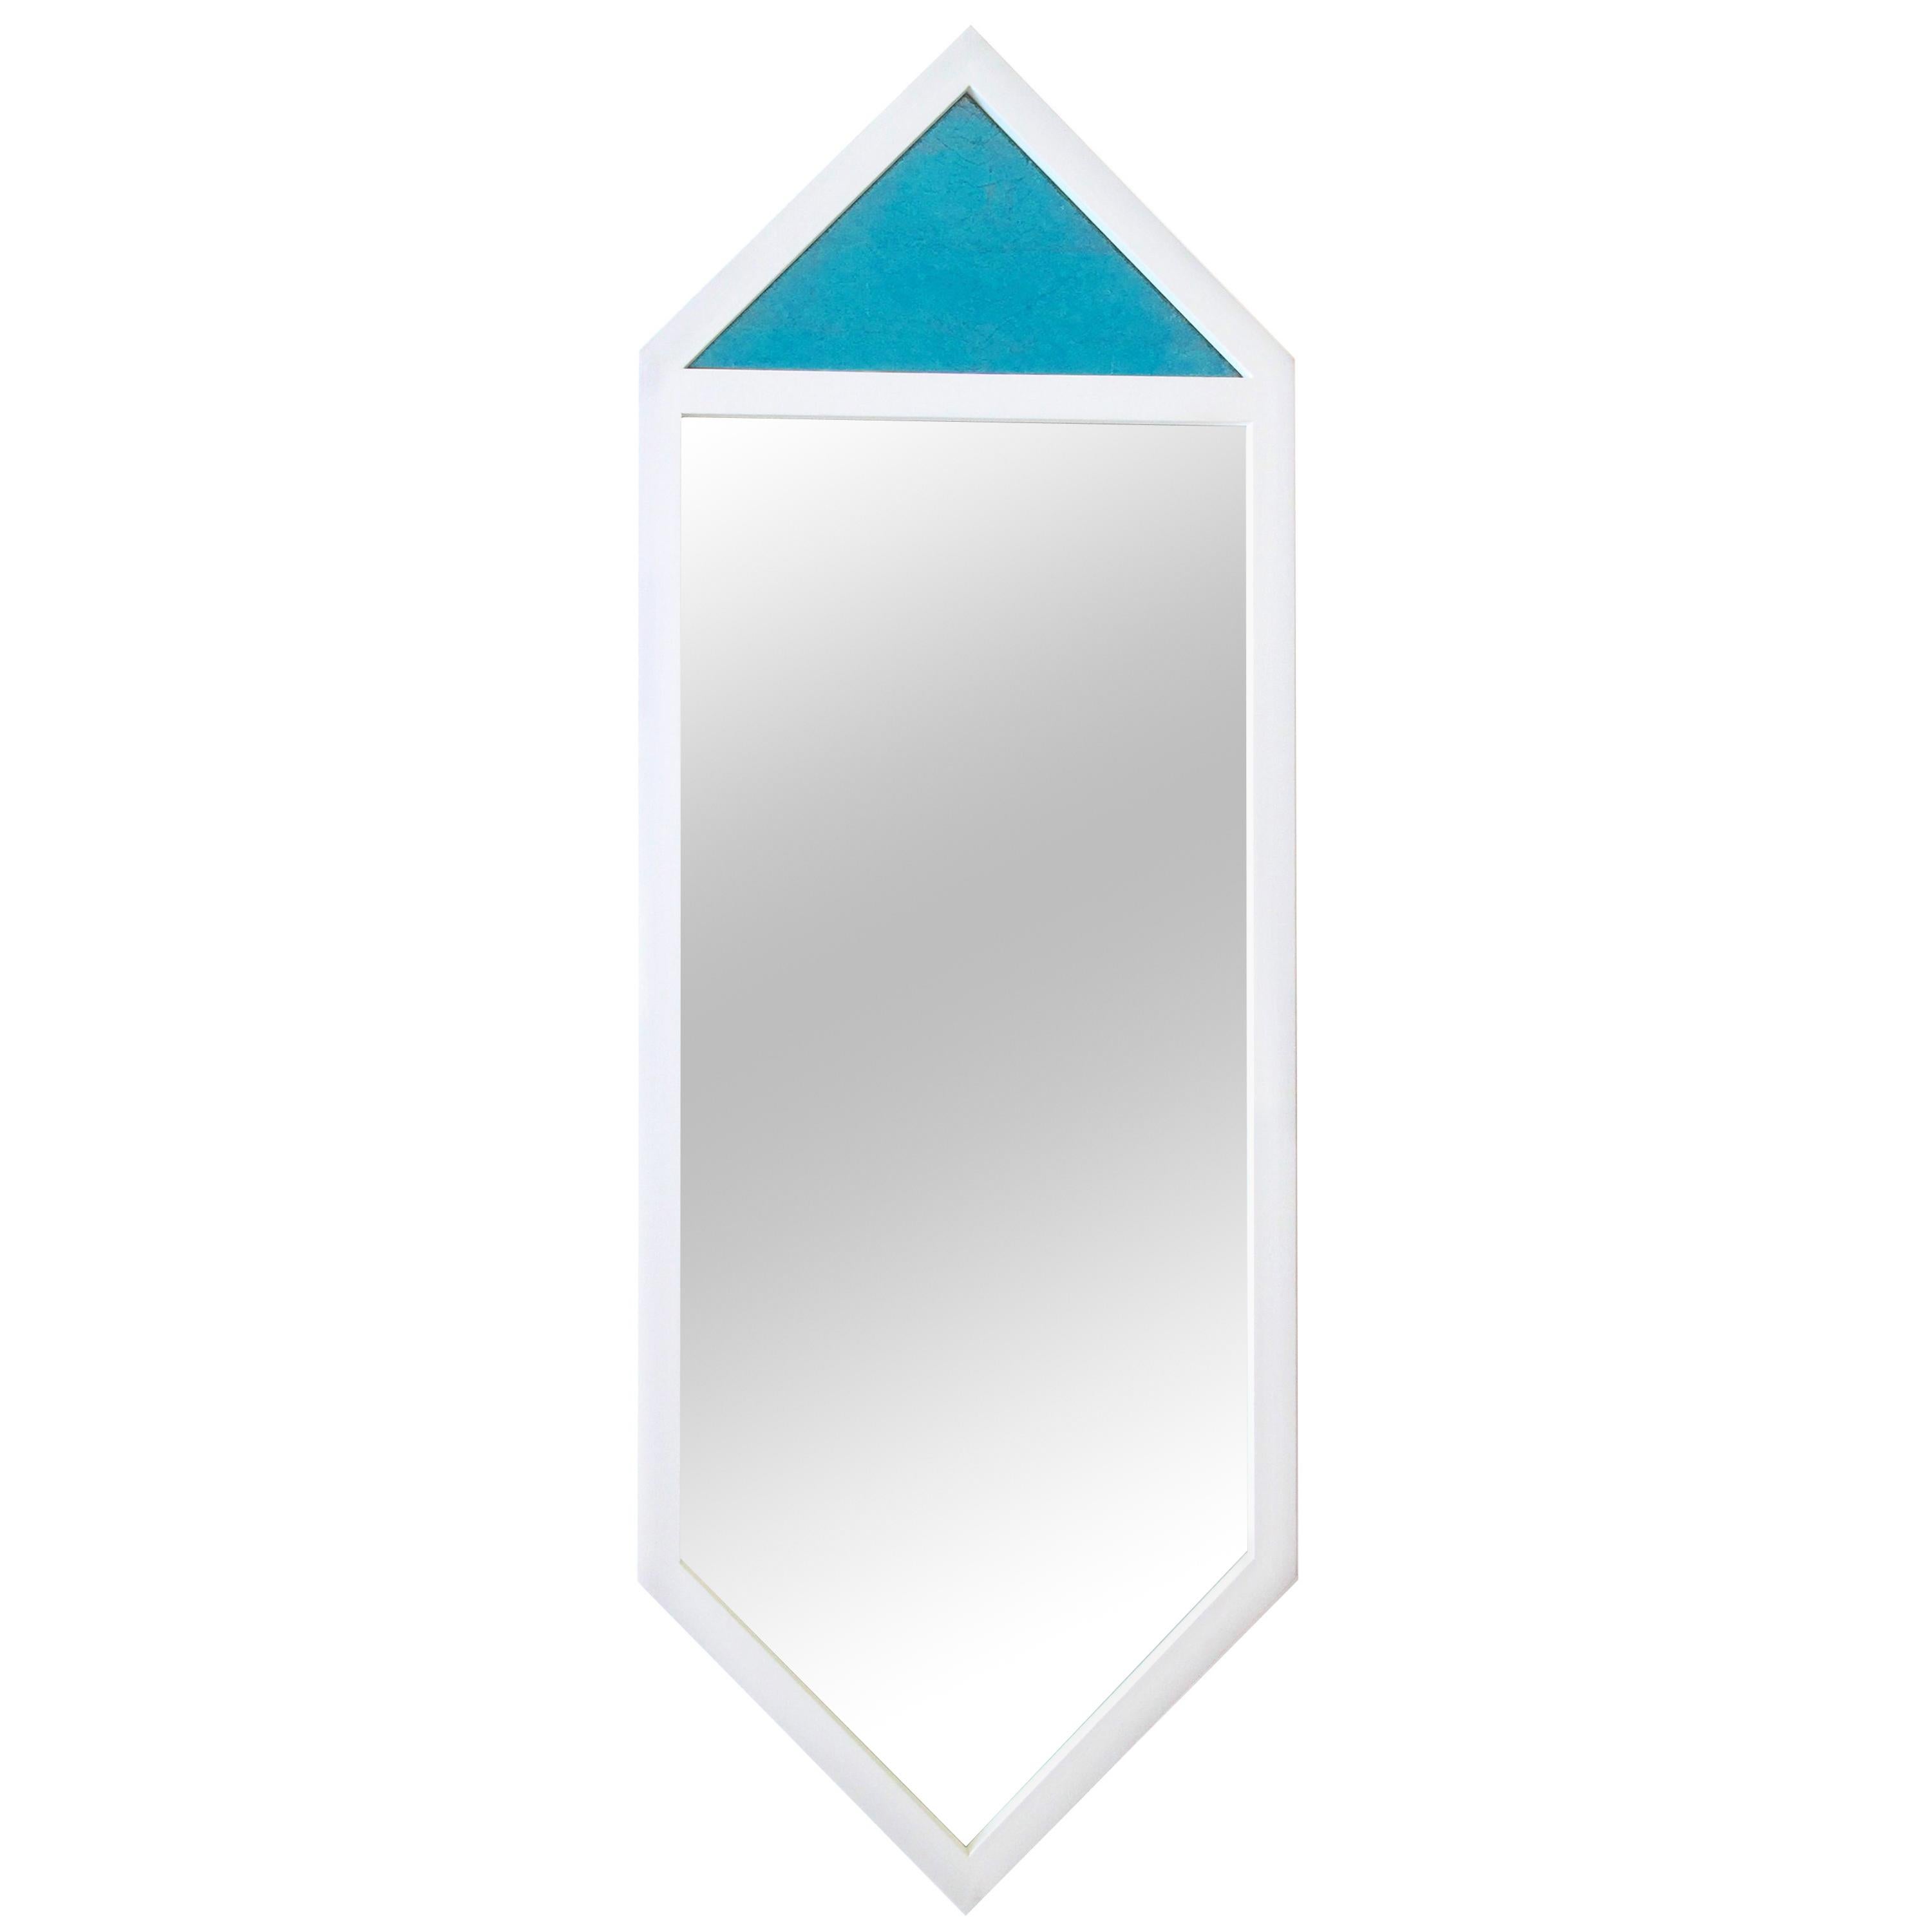 Contemporary "Crystal Teal Mirror" by Alex Drew & No One, 2016